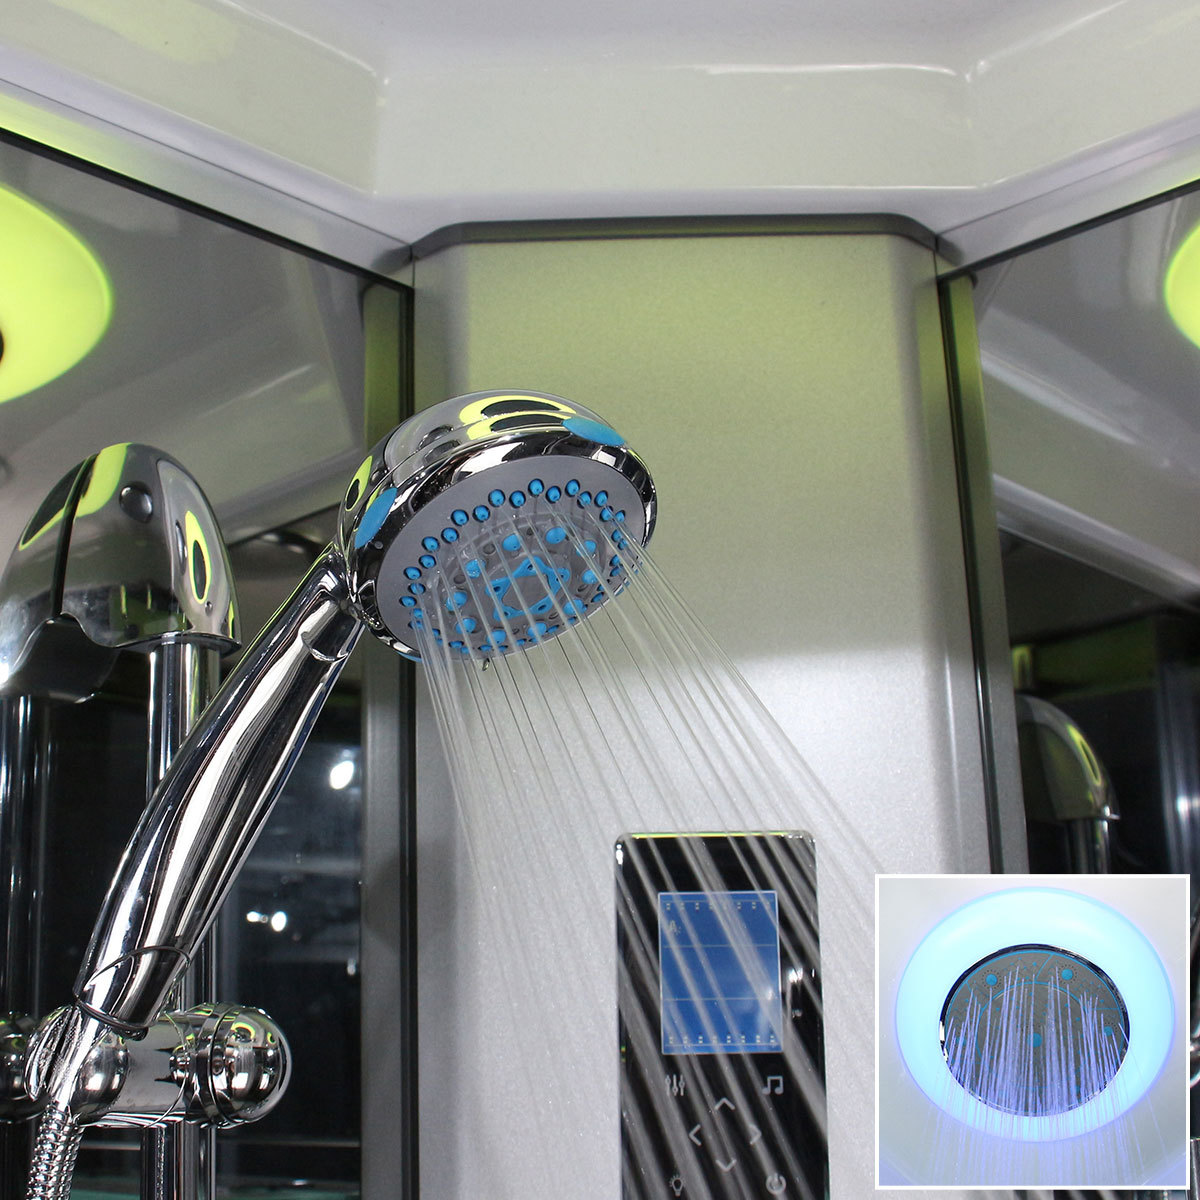 Lifestyle compiled image of shower features